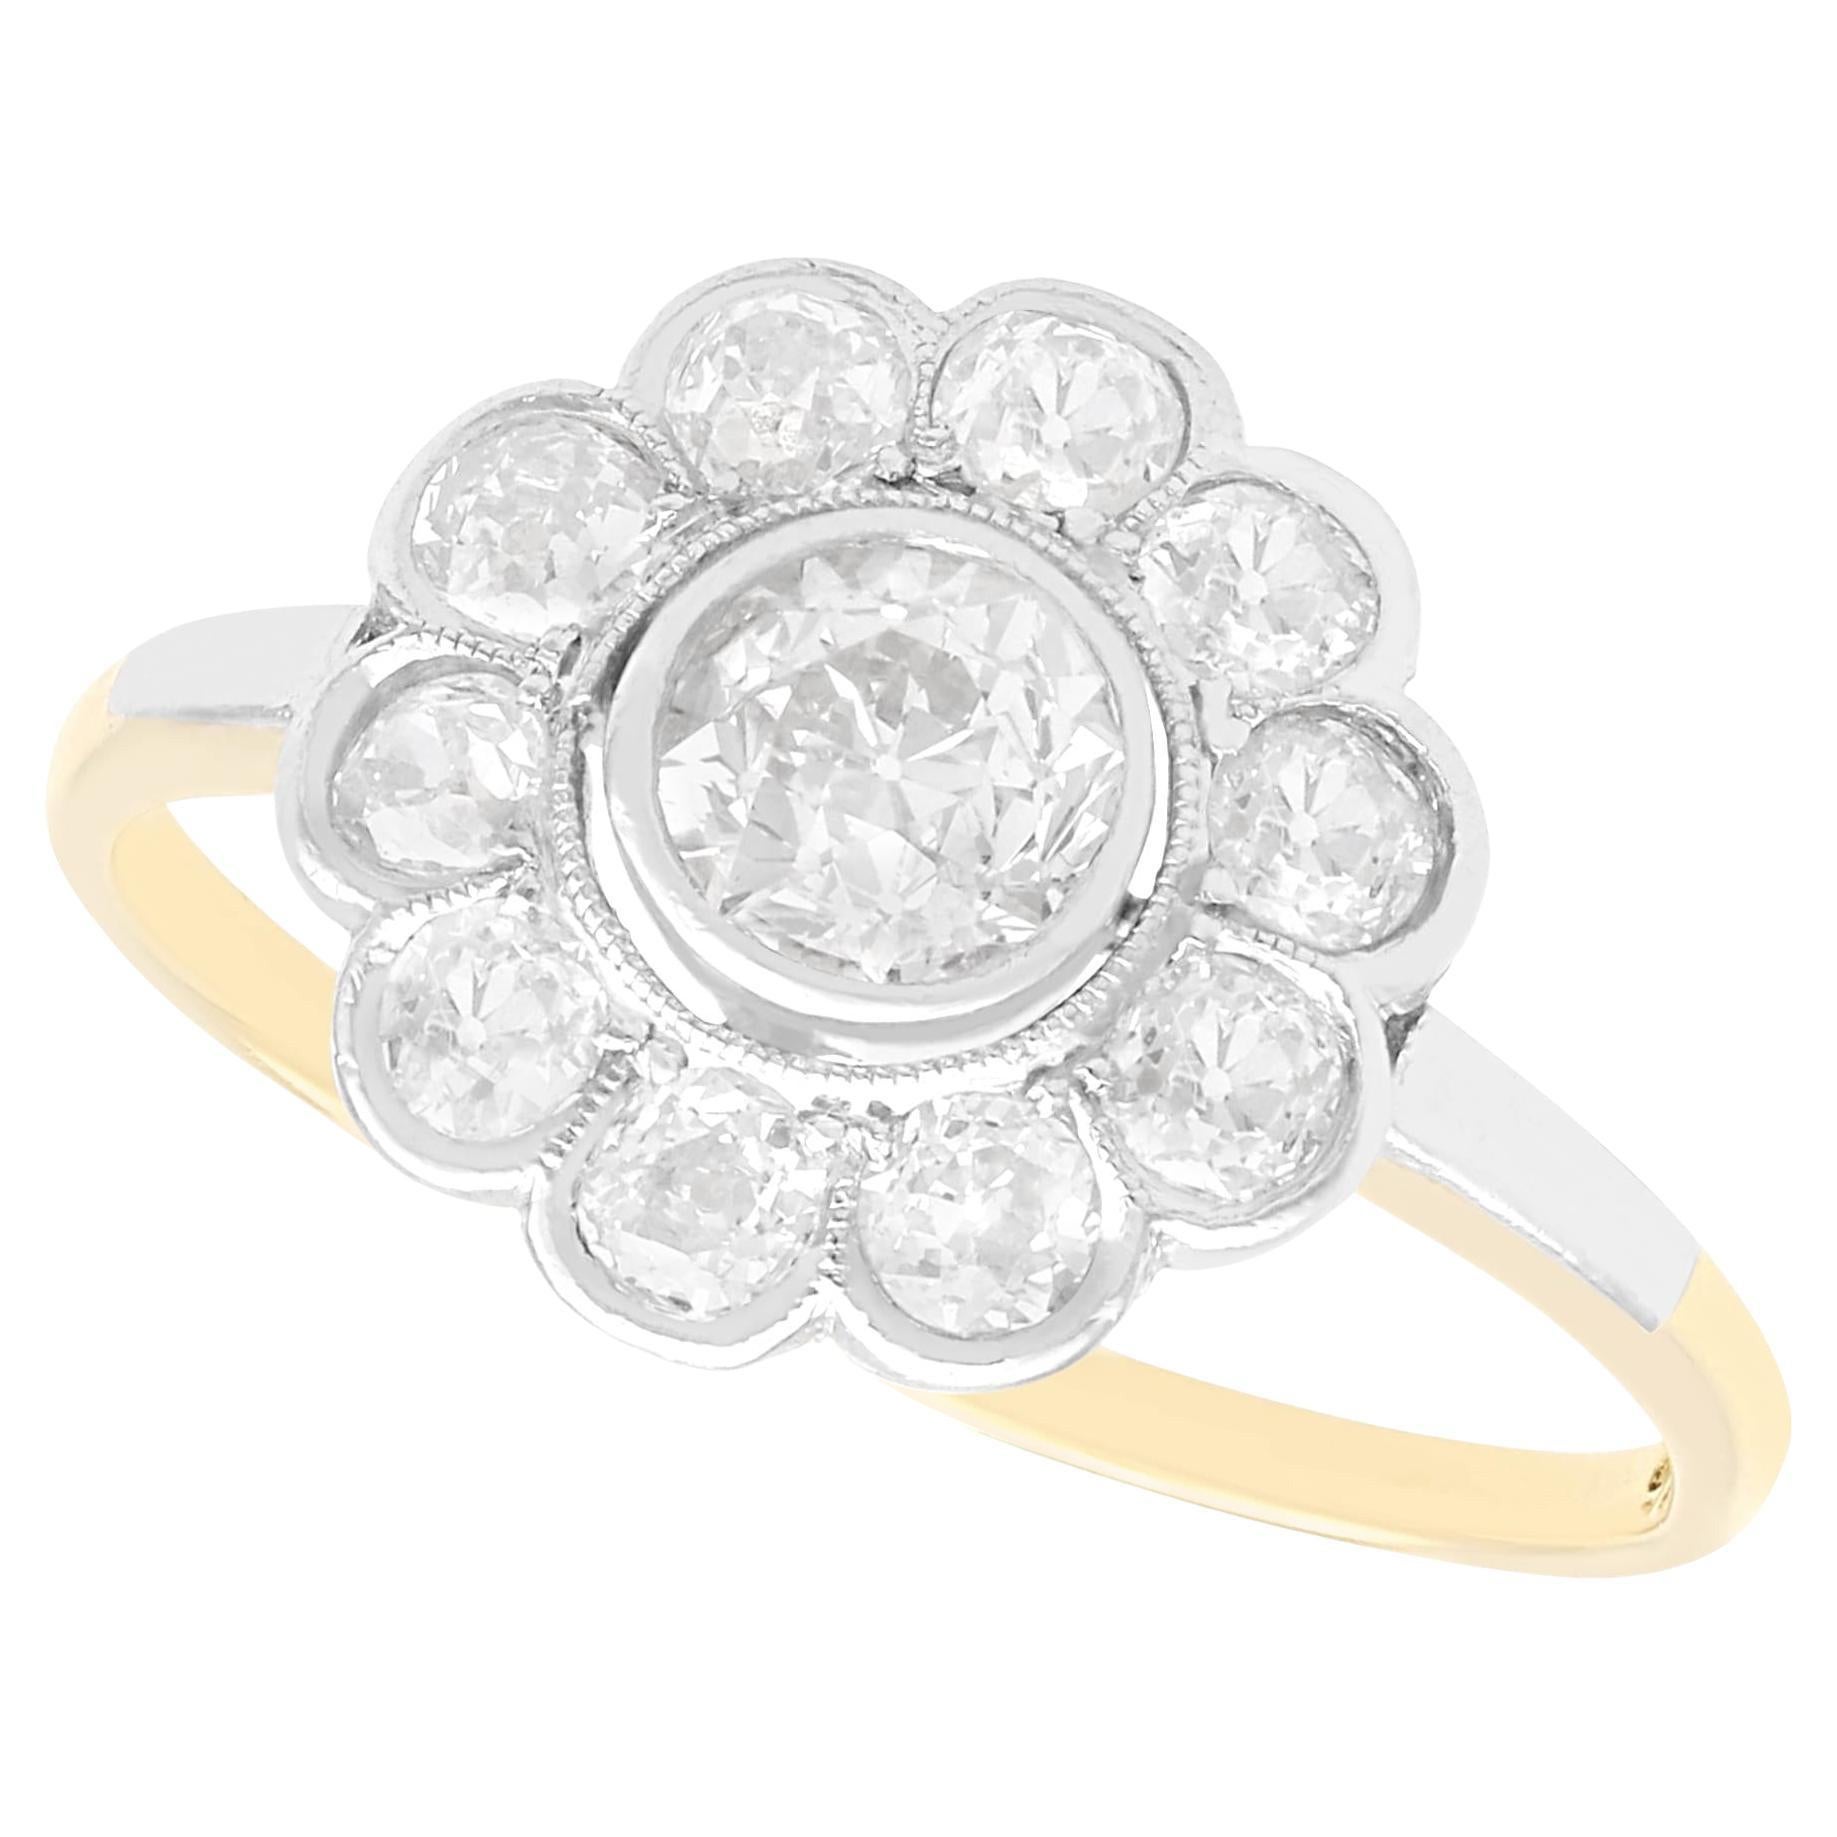 Antique 1.63 Carat Diamond and Yellow Gold Floral Cluster Ring